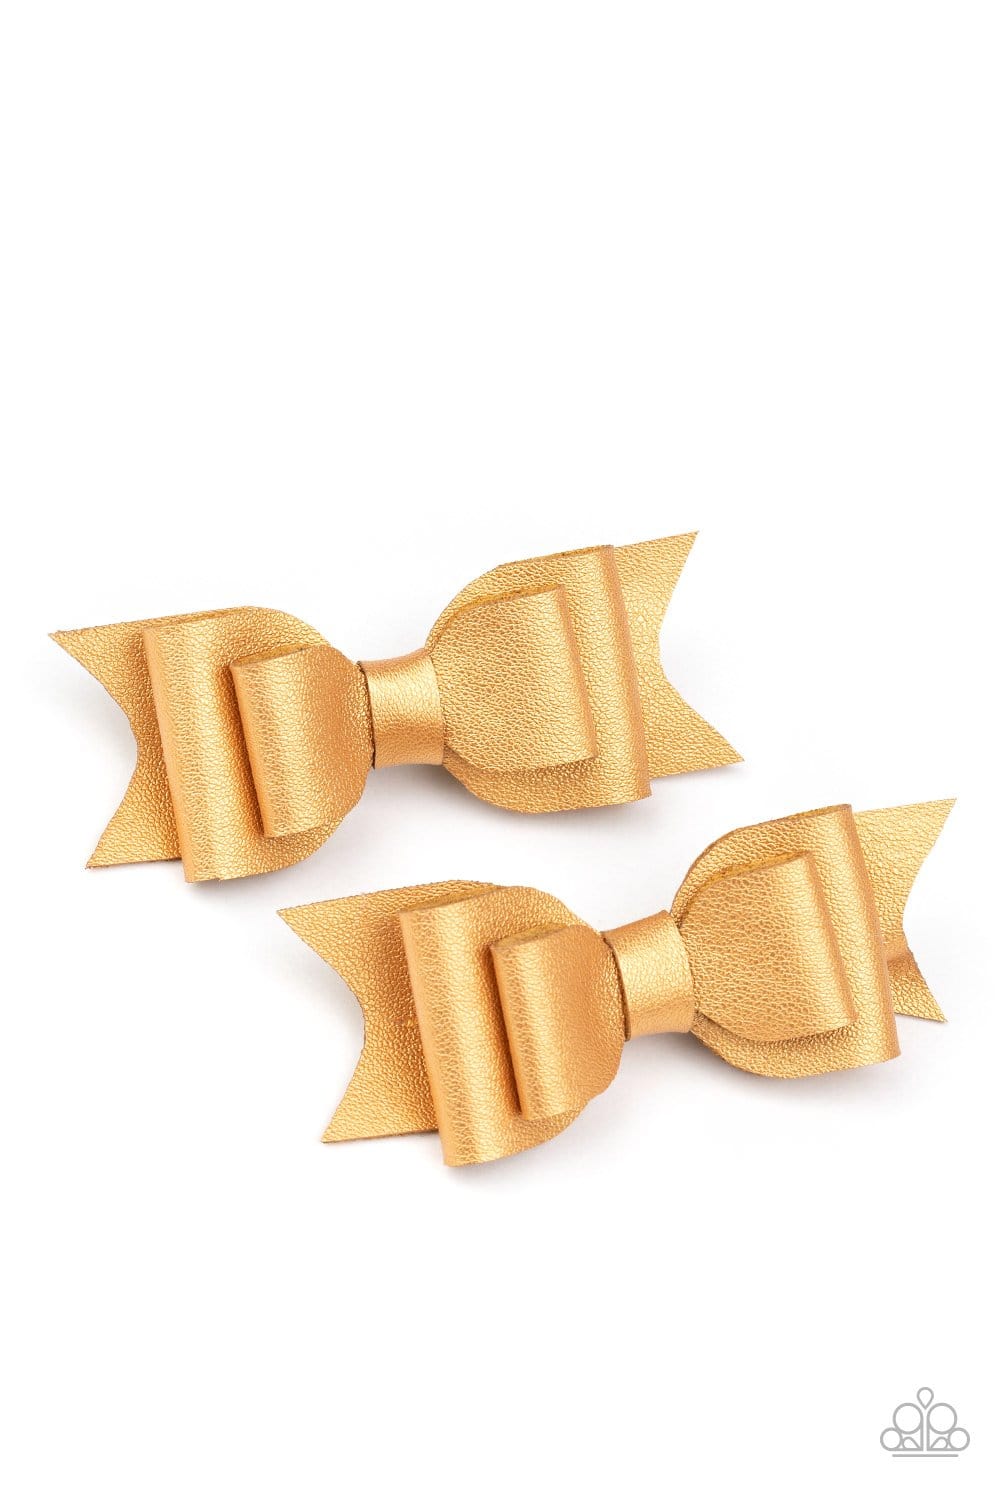 Paparazzi: Totally BOWS My Mind! - Gold Hair Clips - Jewels N’ Thingz Boutique